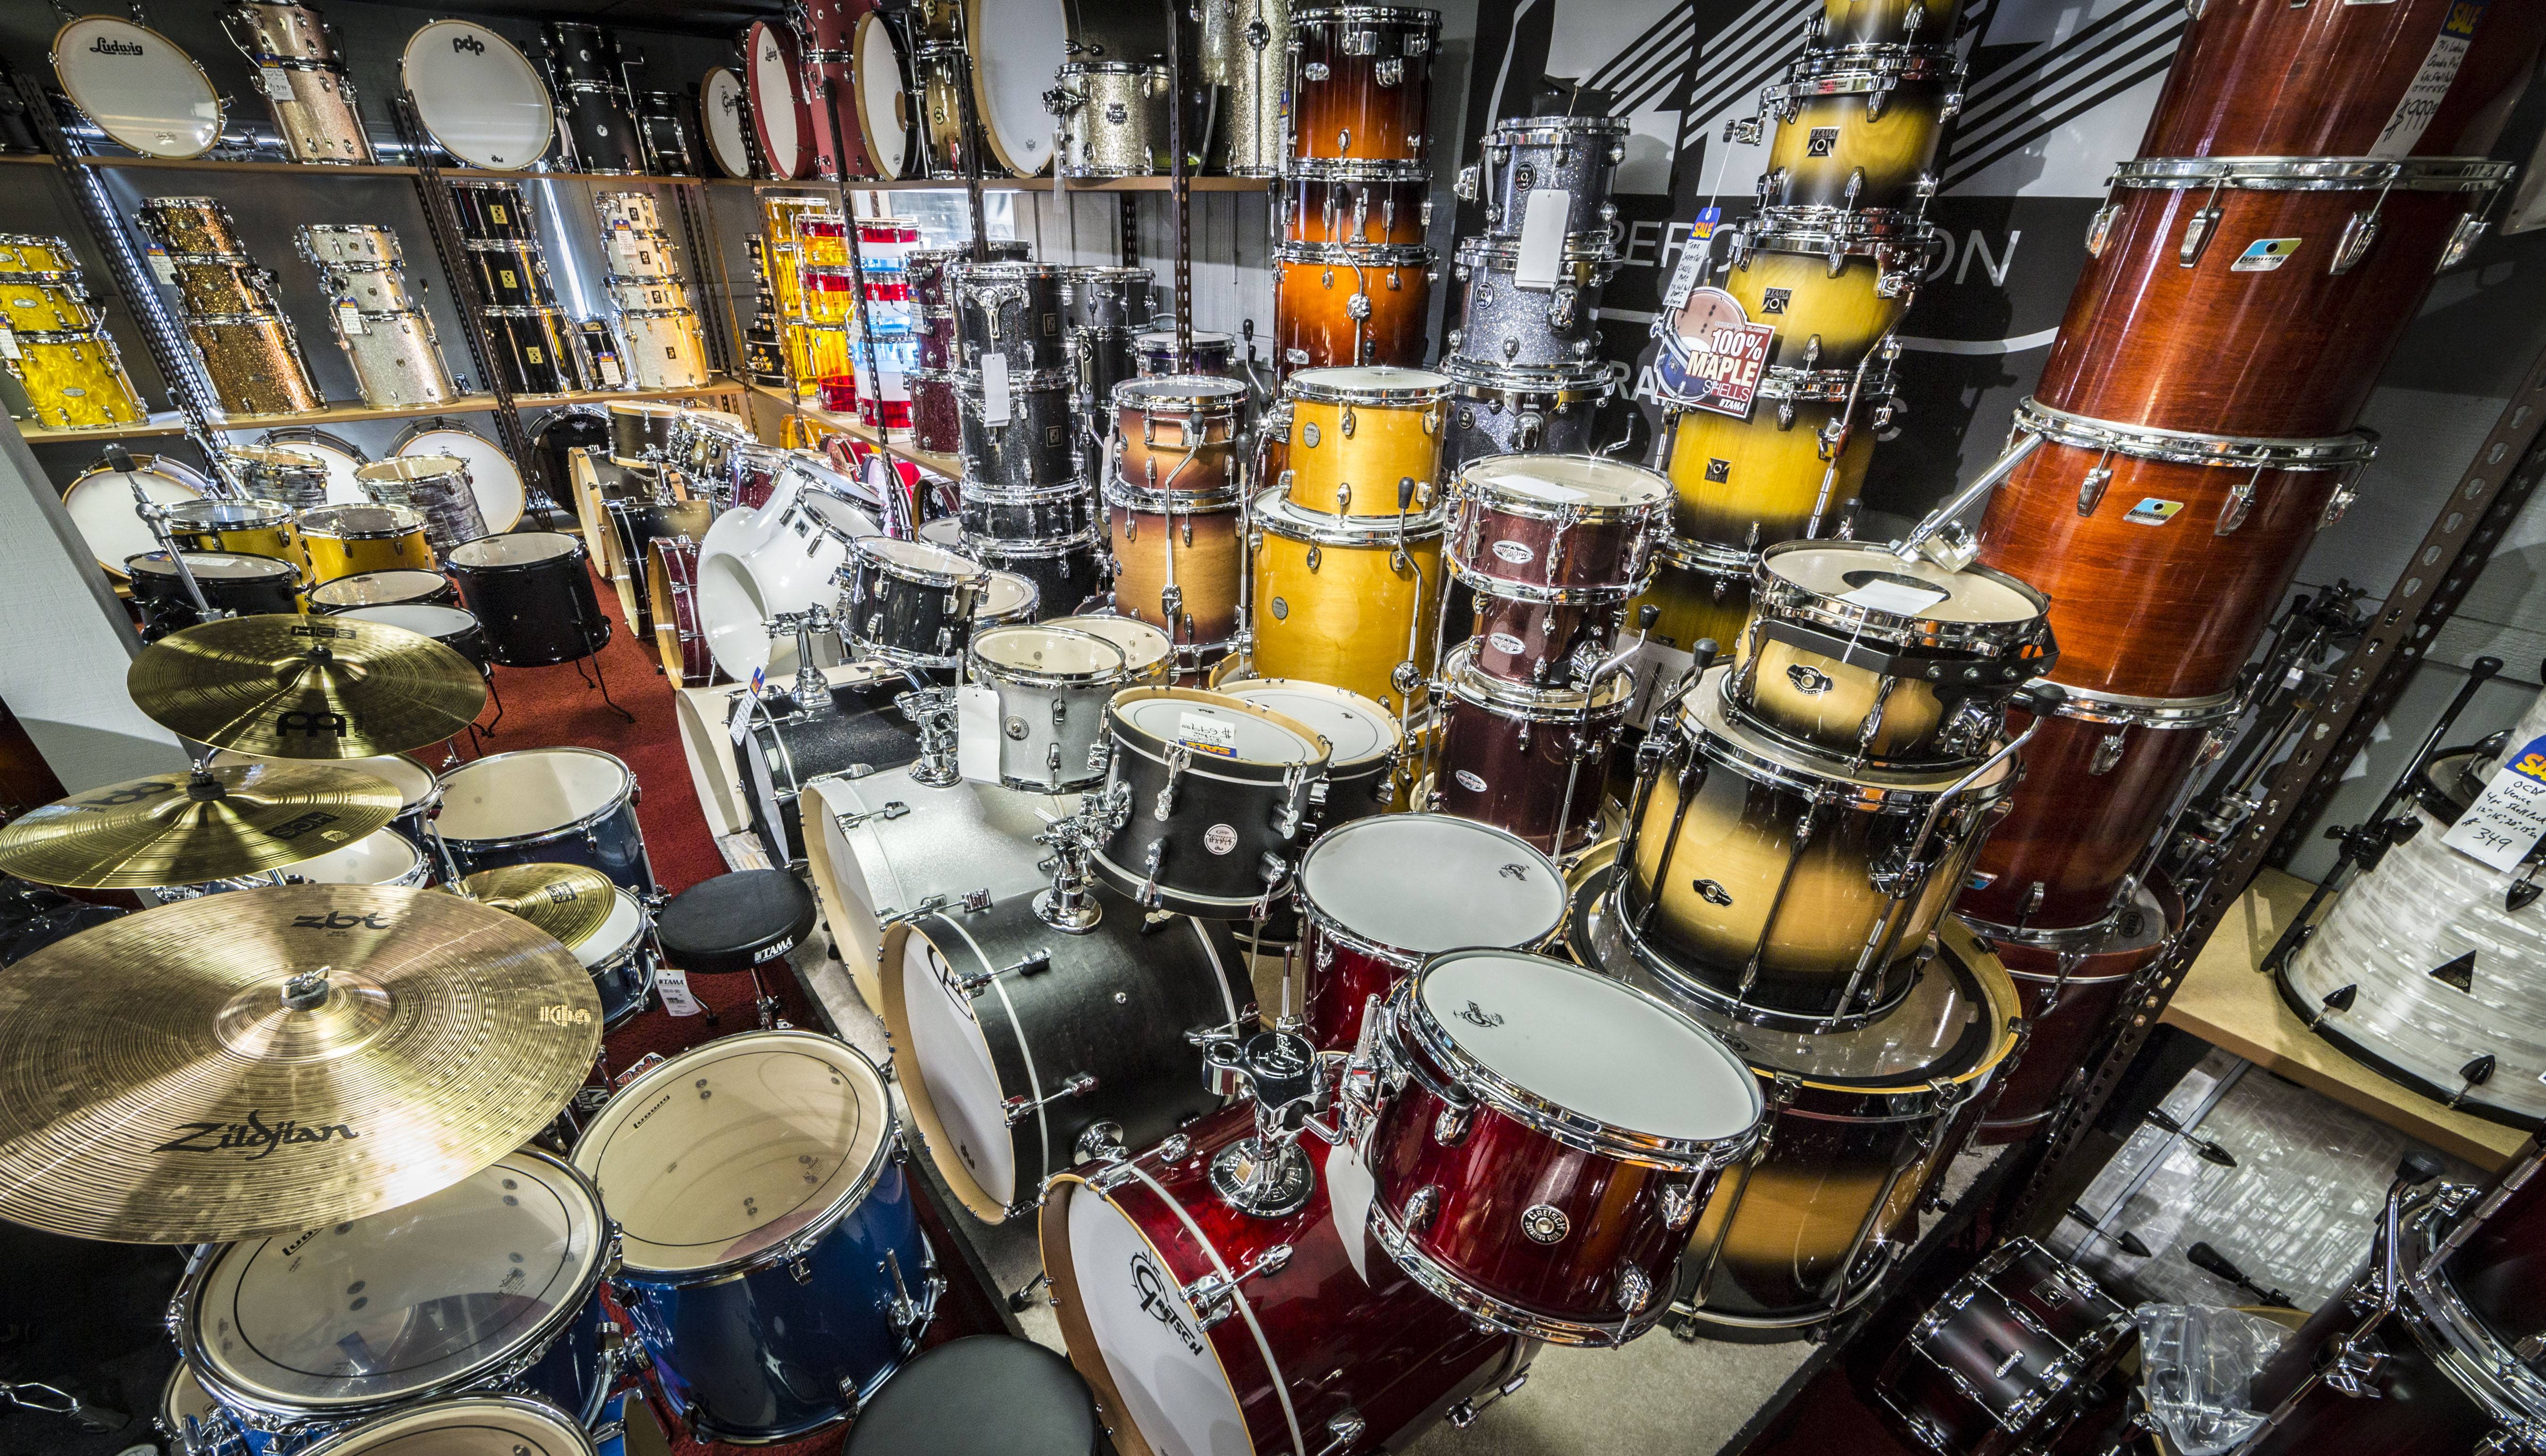 35 Years of Business Percussion Specialty Shop | Raleigh NC (pic: 2112percussion.com)